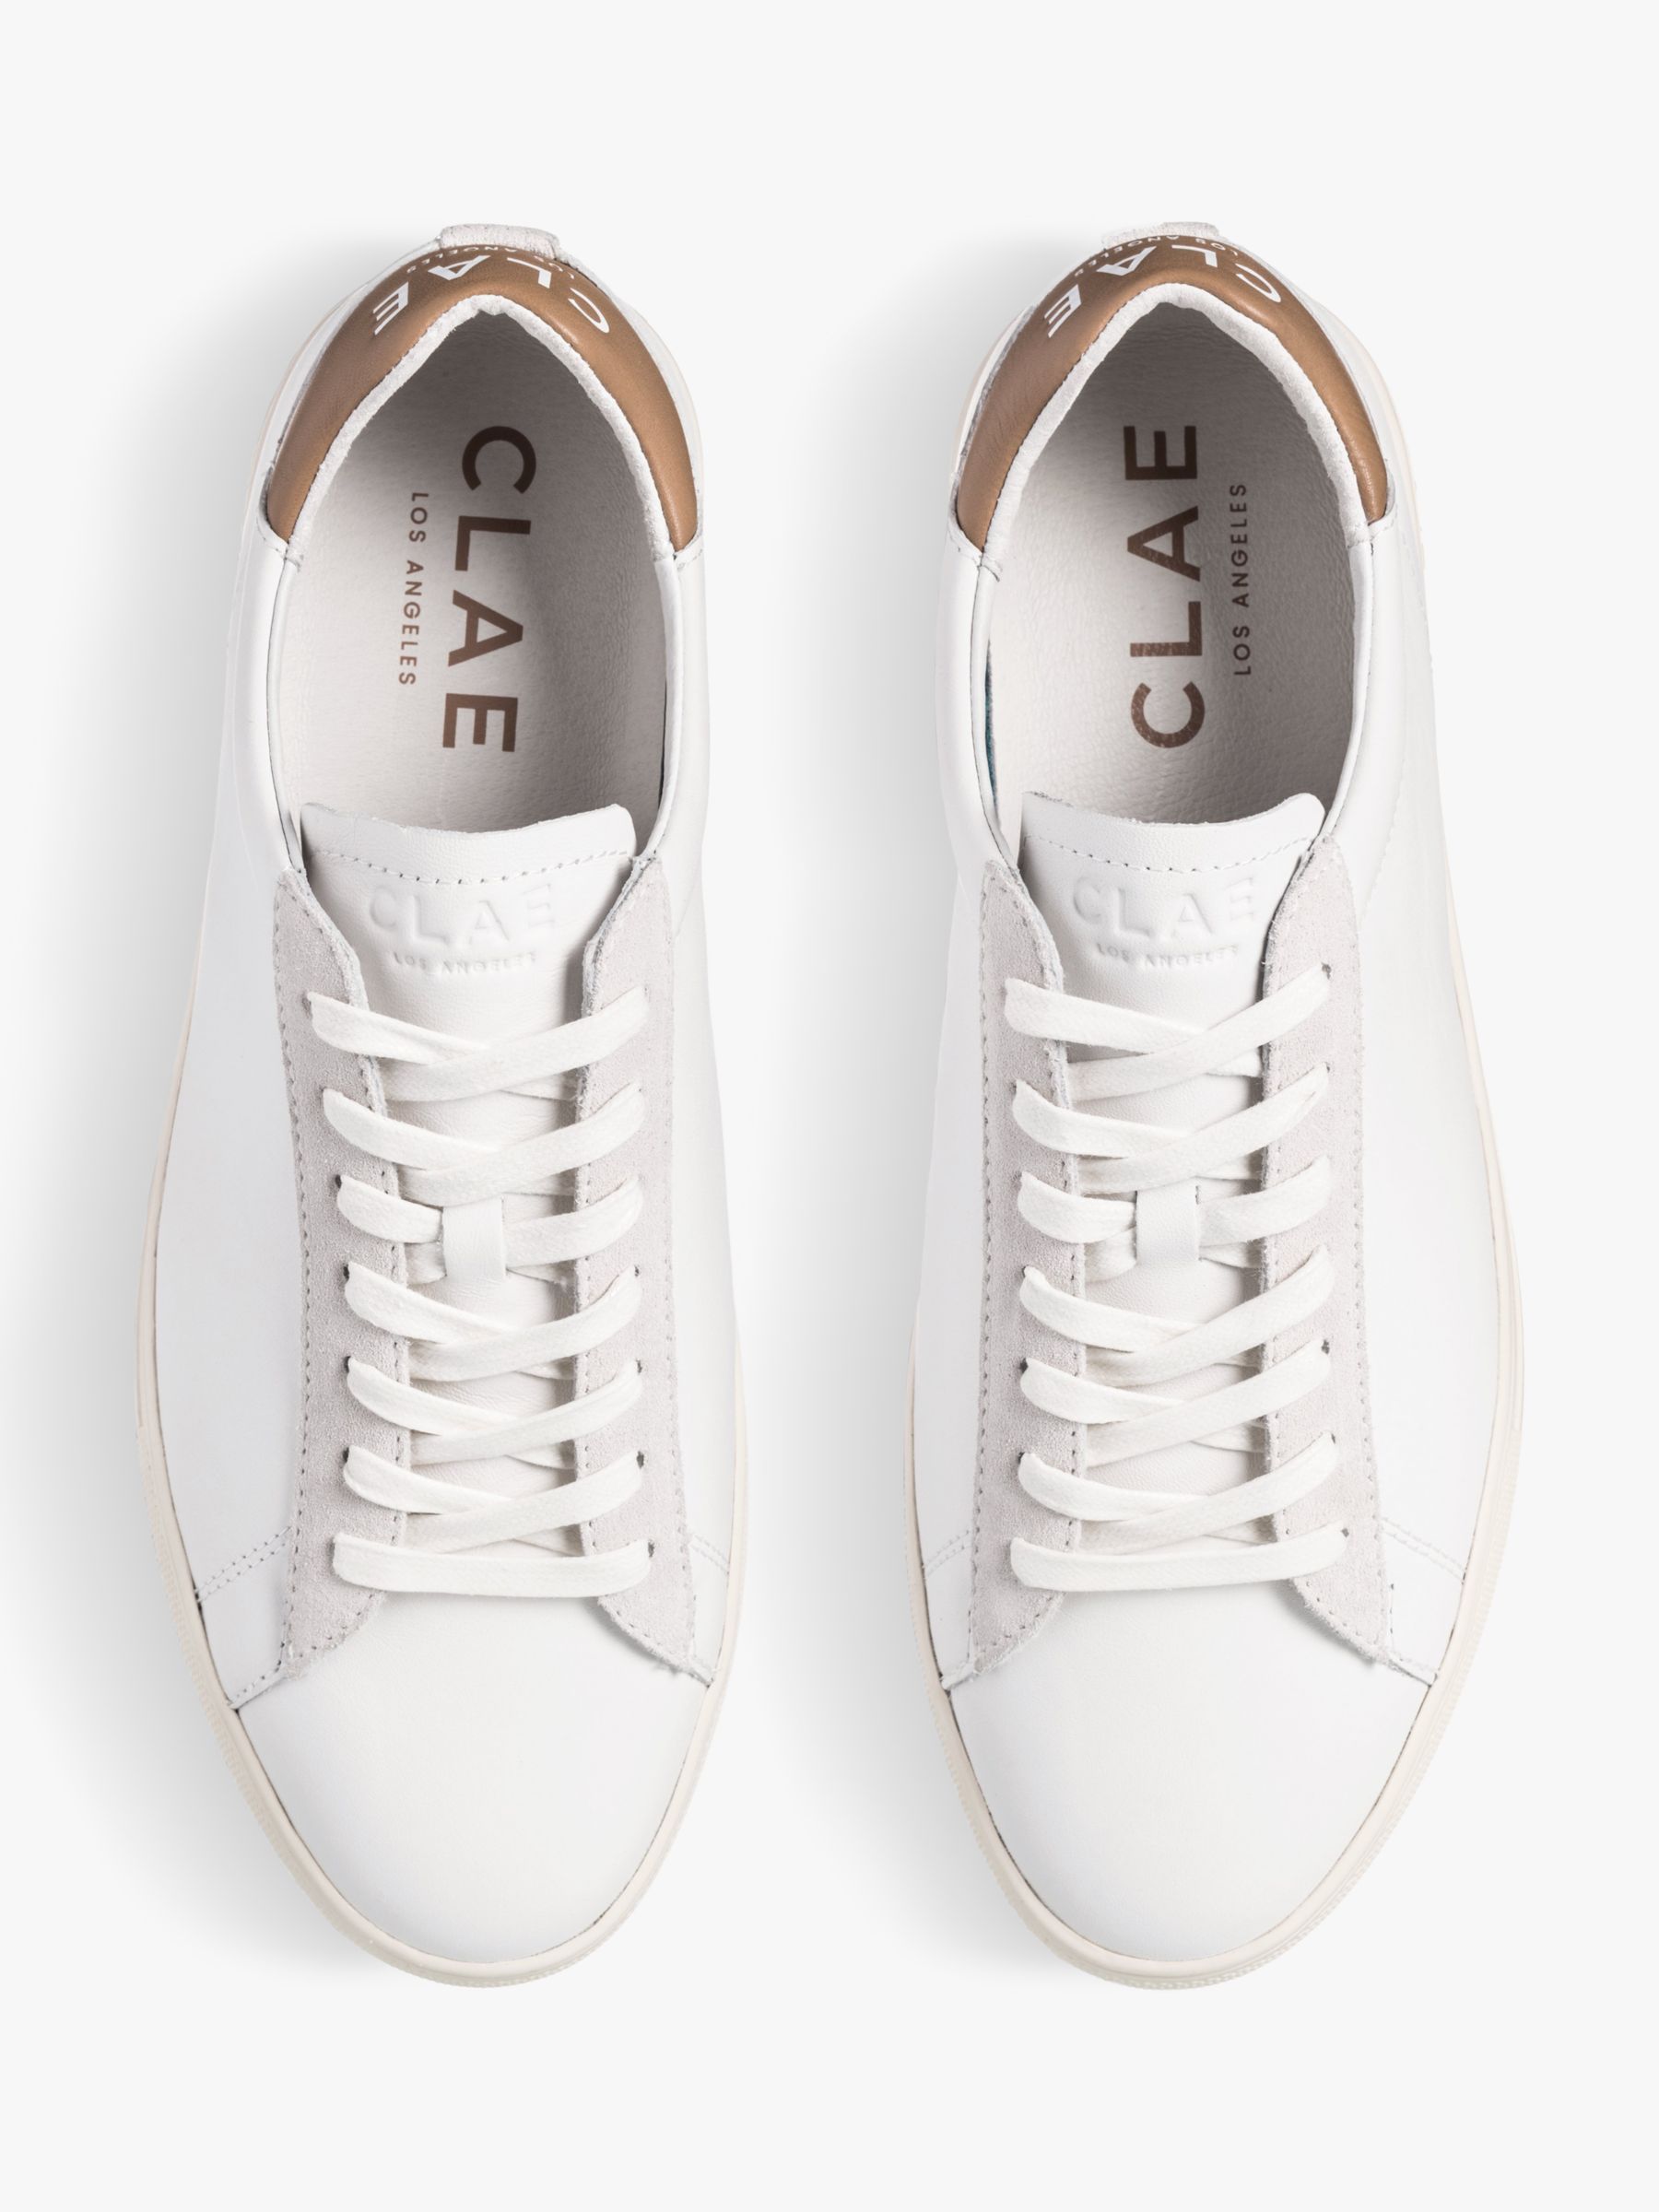 CLAE Bradley California Leather Lace Up Trainers, White/Camel at John ...